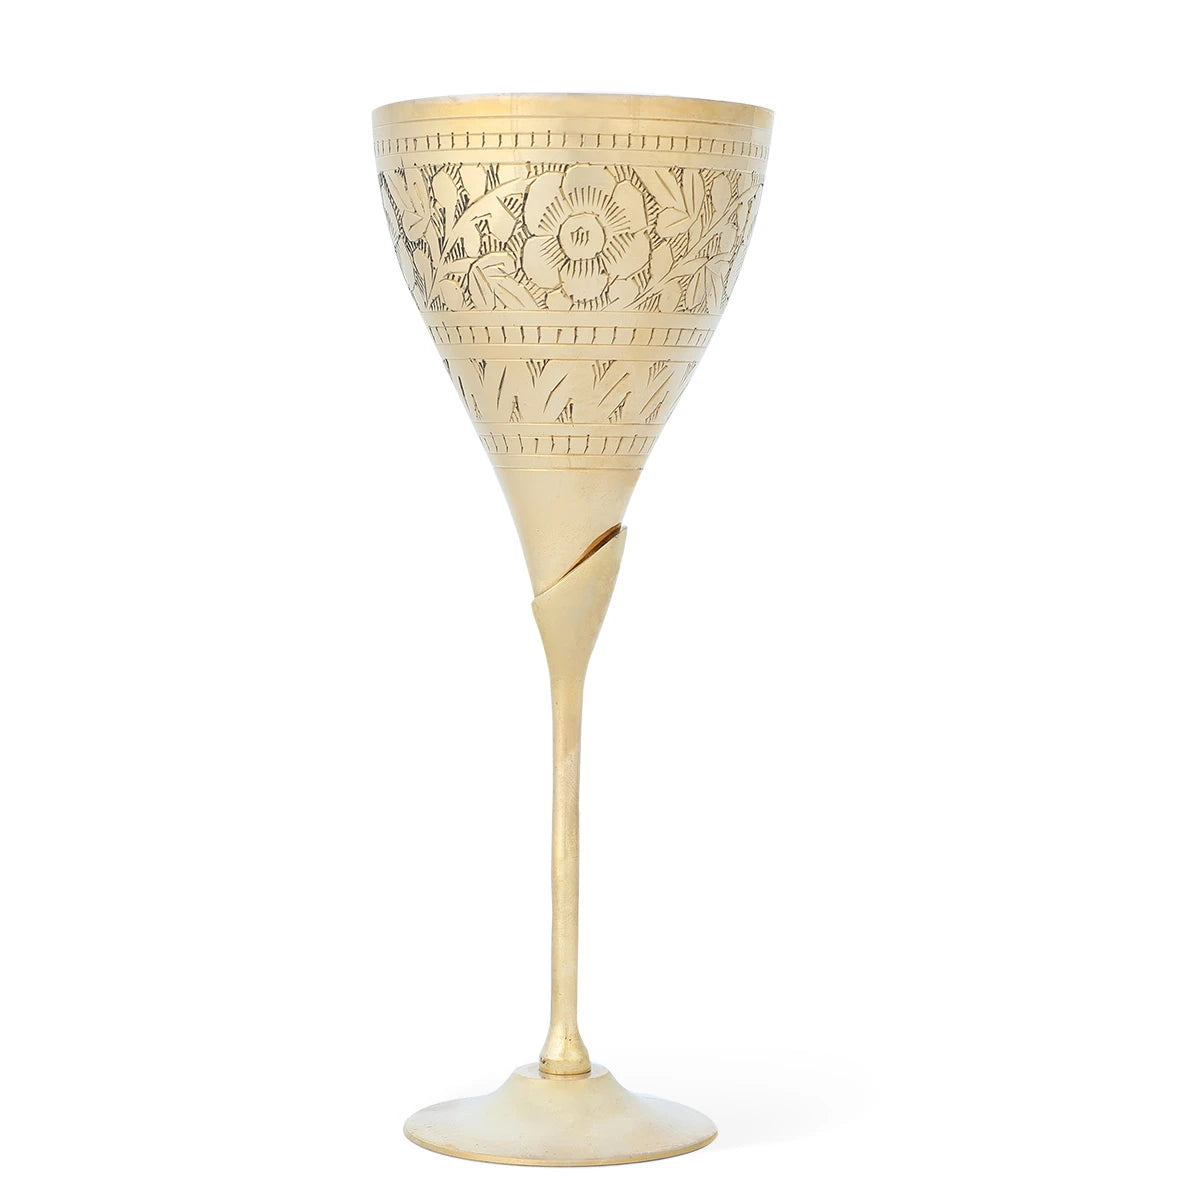 Front View of Sculpted Brass Goblet - Gold